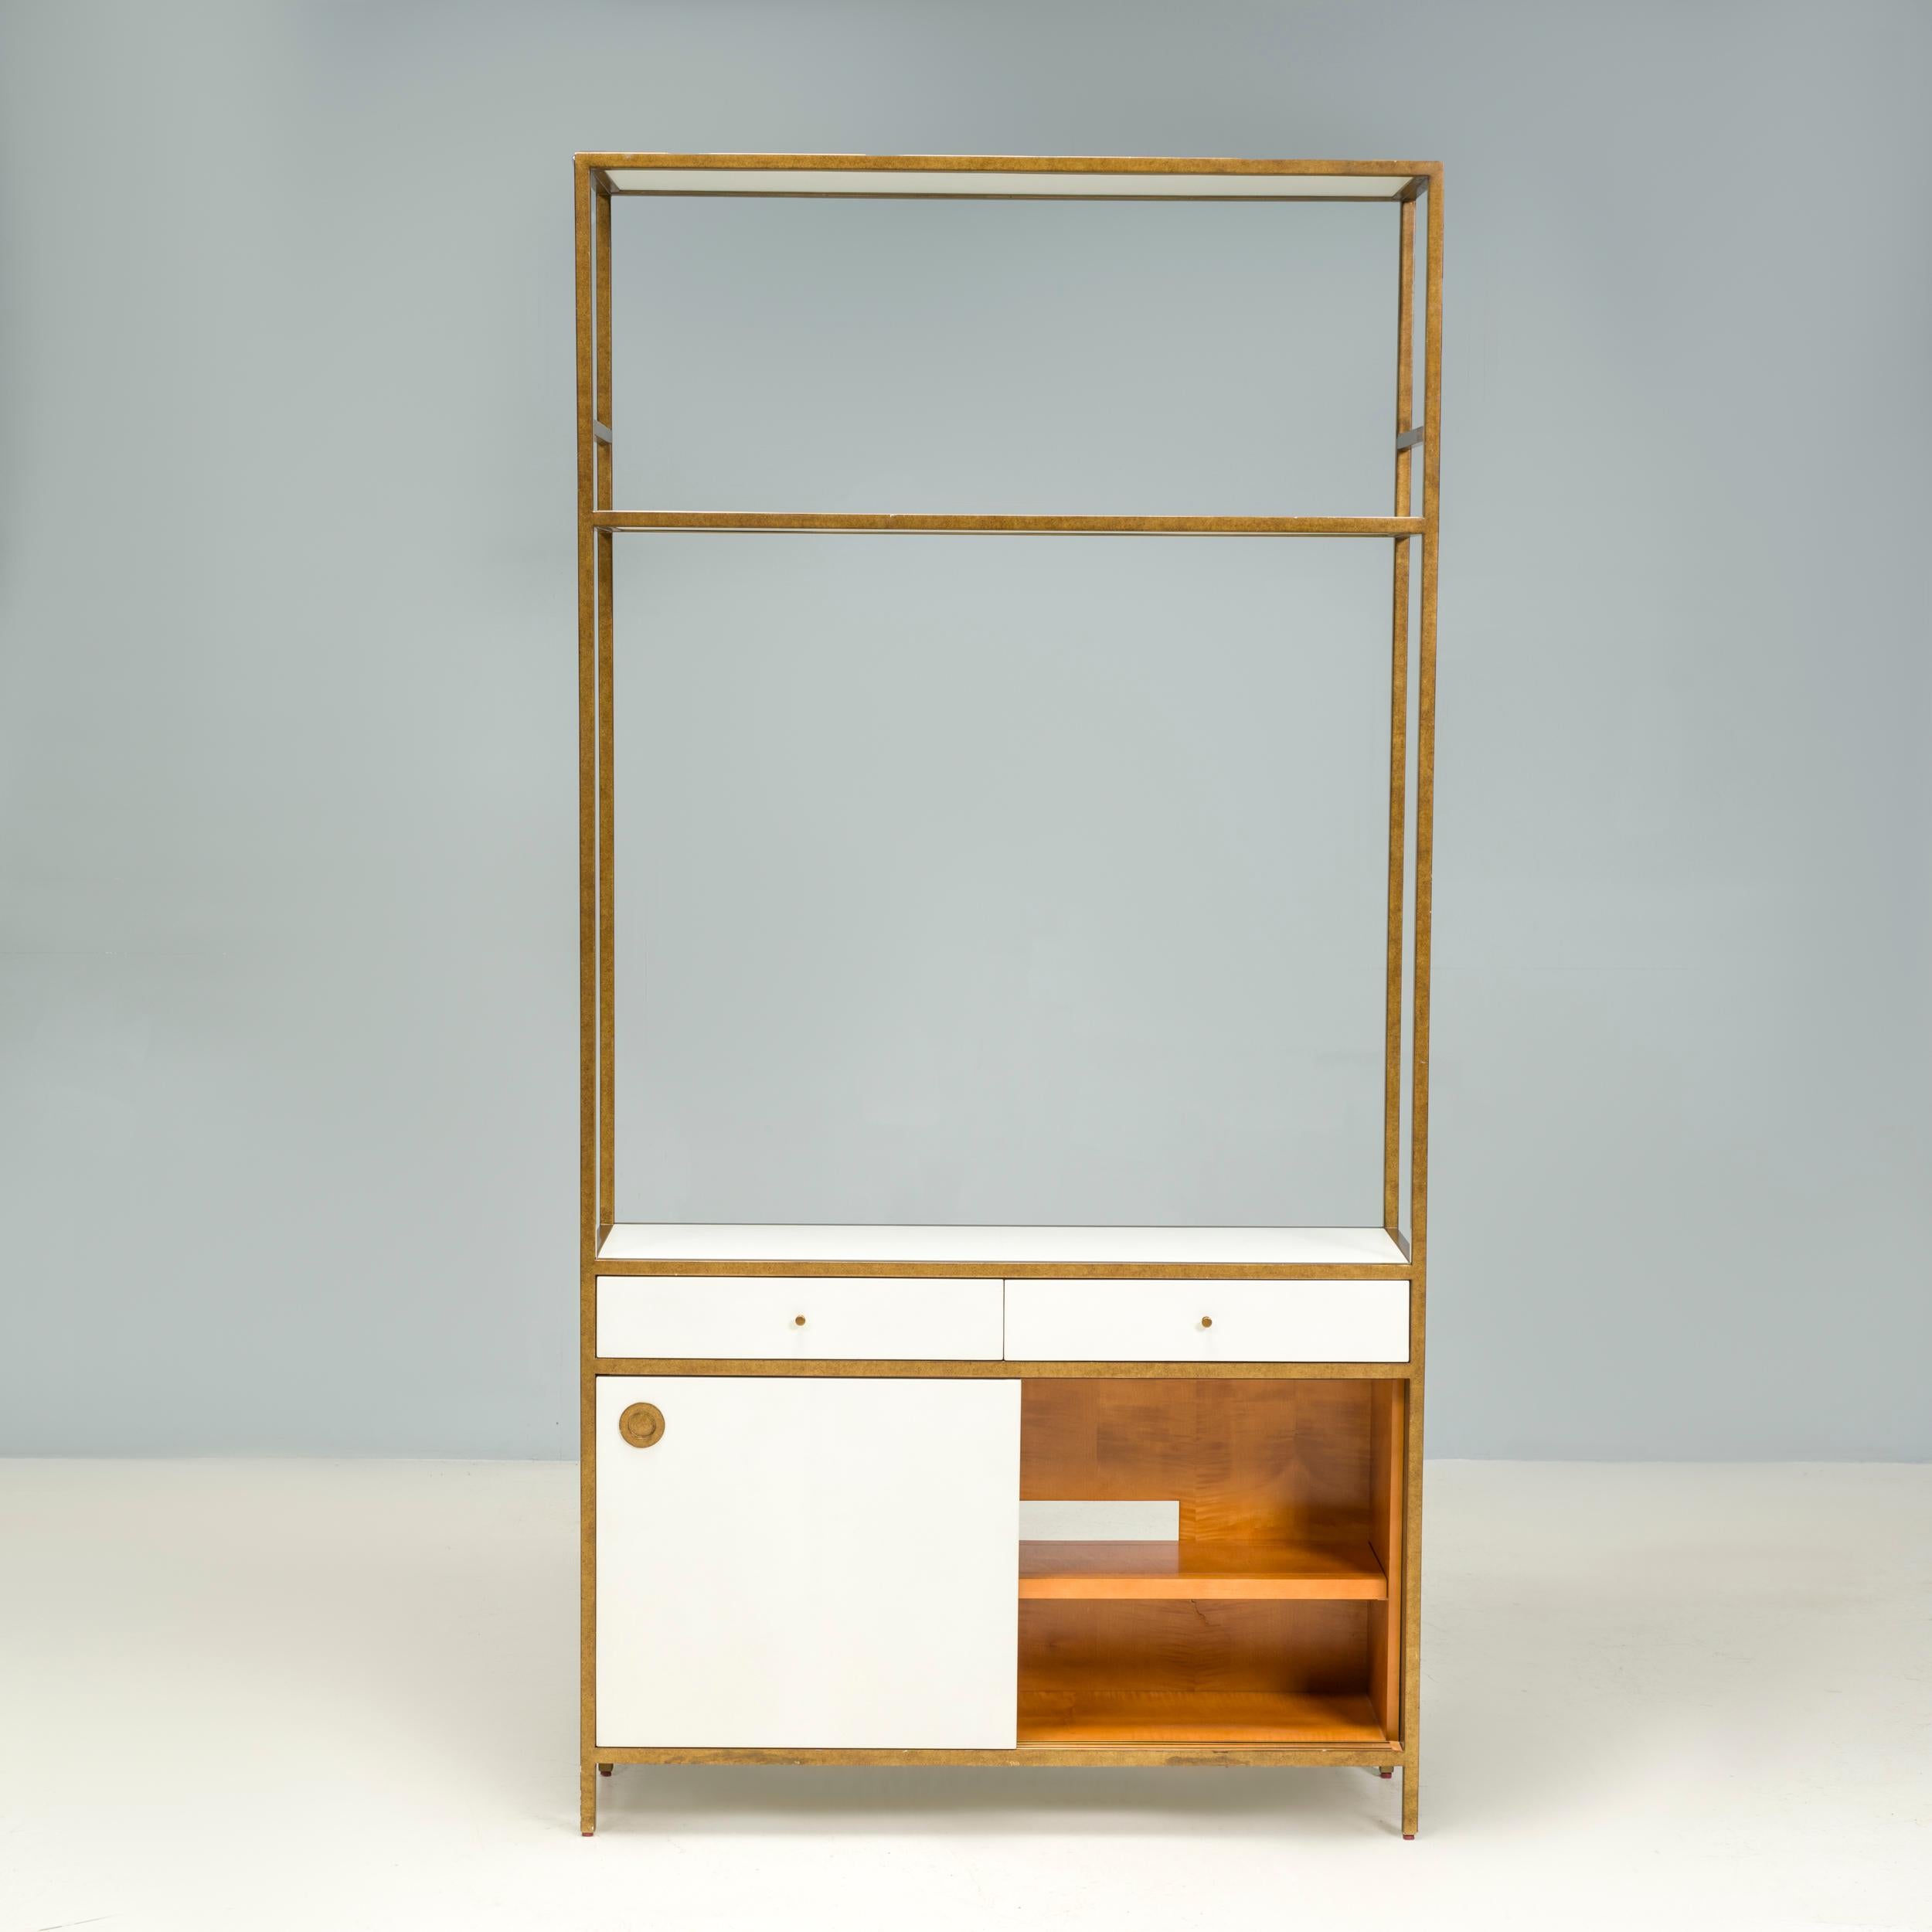 Julian Chichester founded his furniture design company in 1995, inspired by the classic shapes from the 19th and 20th centuries and adding his own unique twist through contemporary finishes and details.

The University bookshelf features a slimline